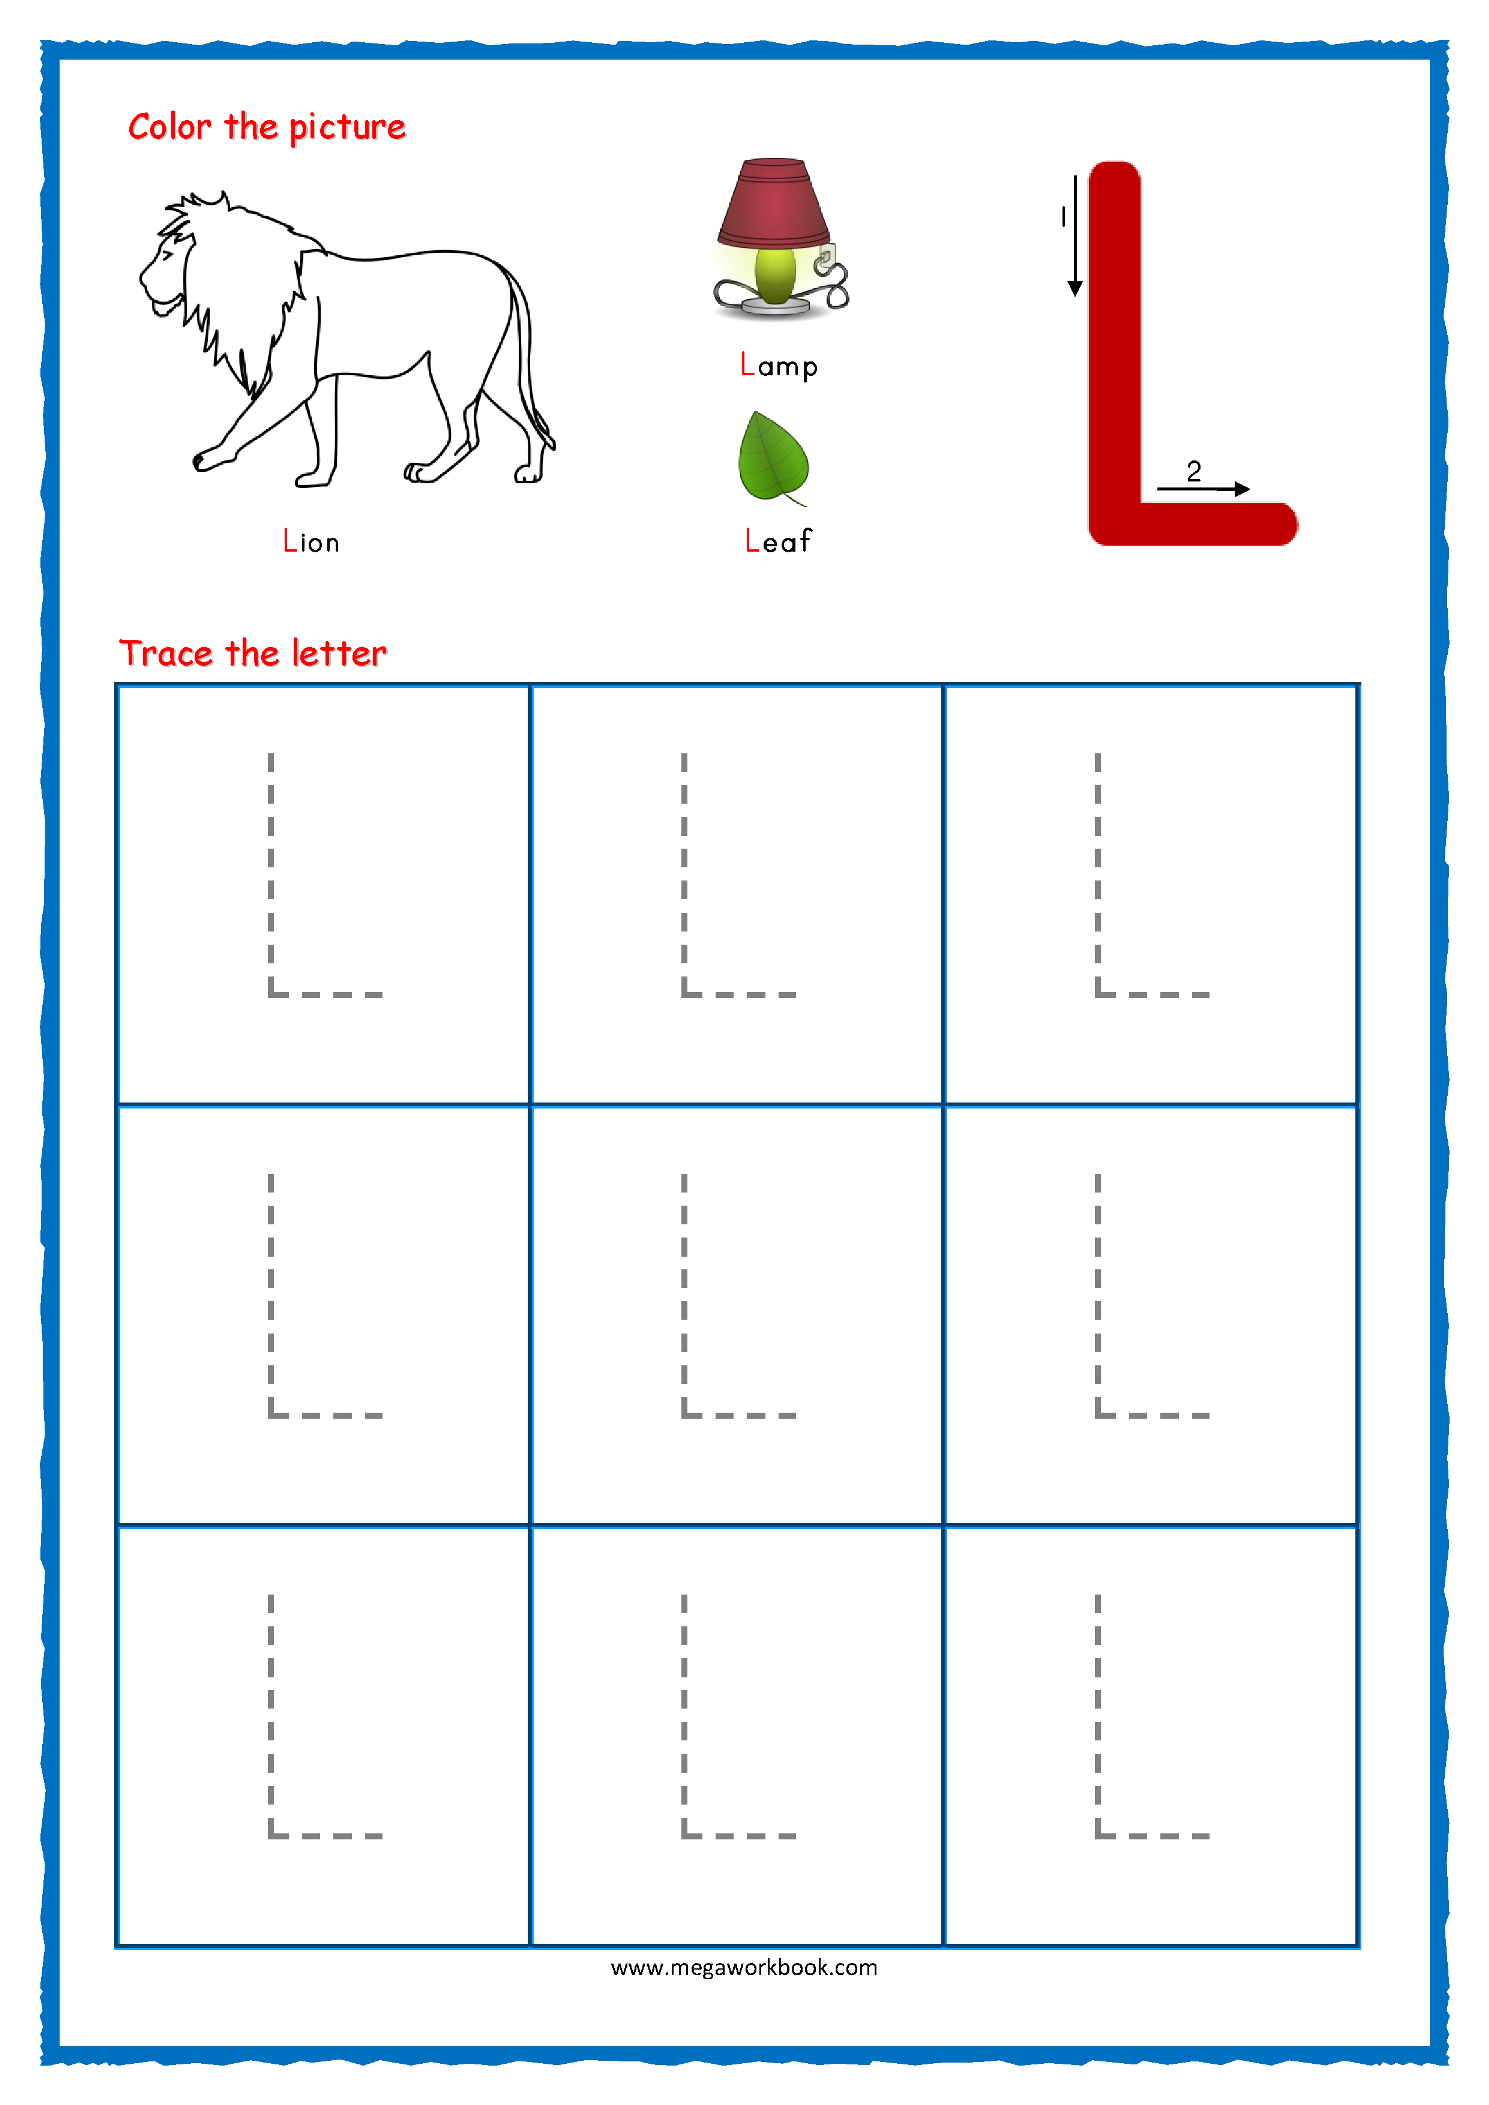 tracing-letters-alphabet-tracing-capital-letters-letter-tracing-worksheets-free